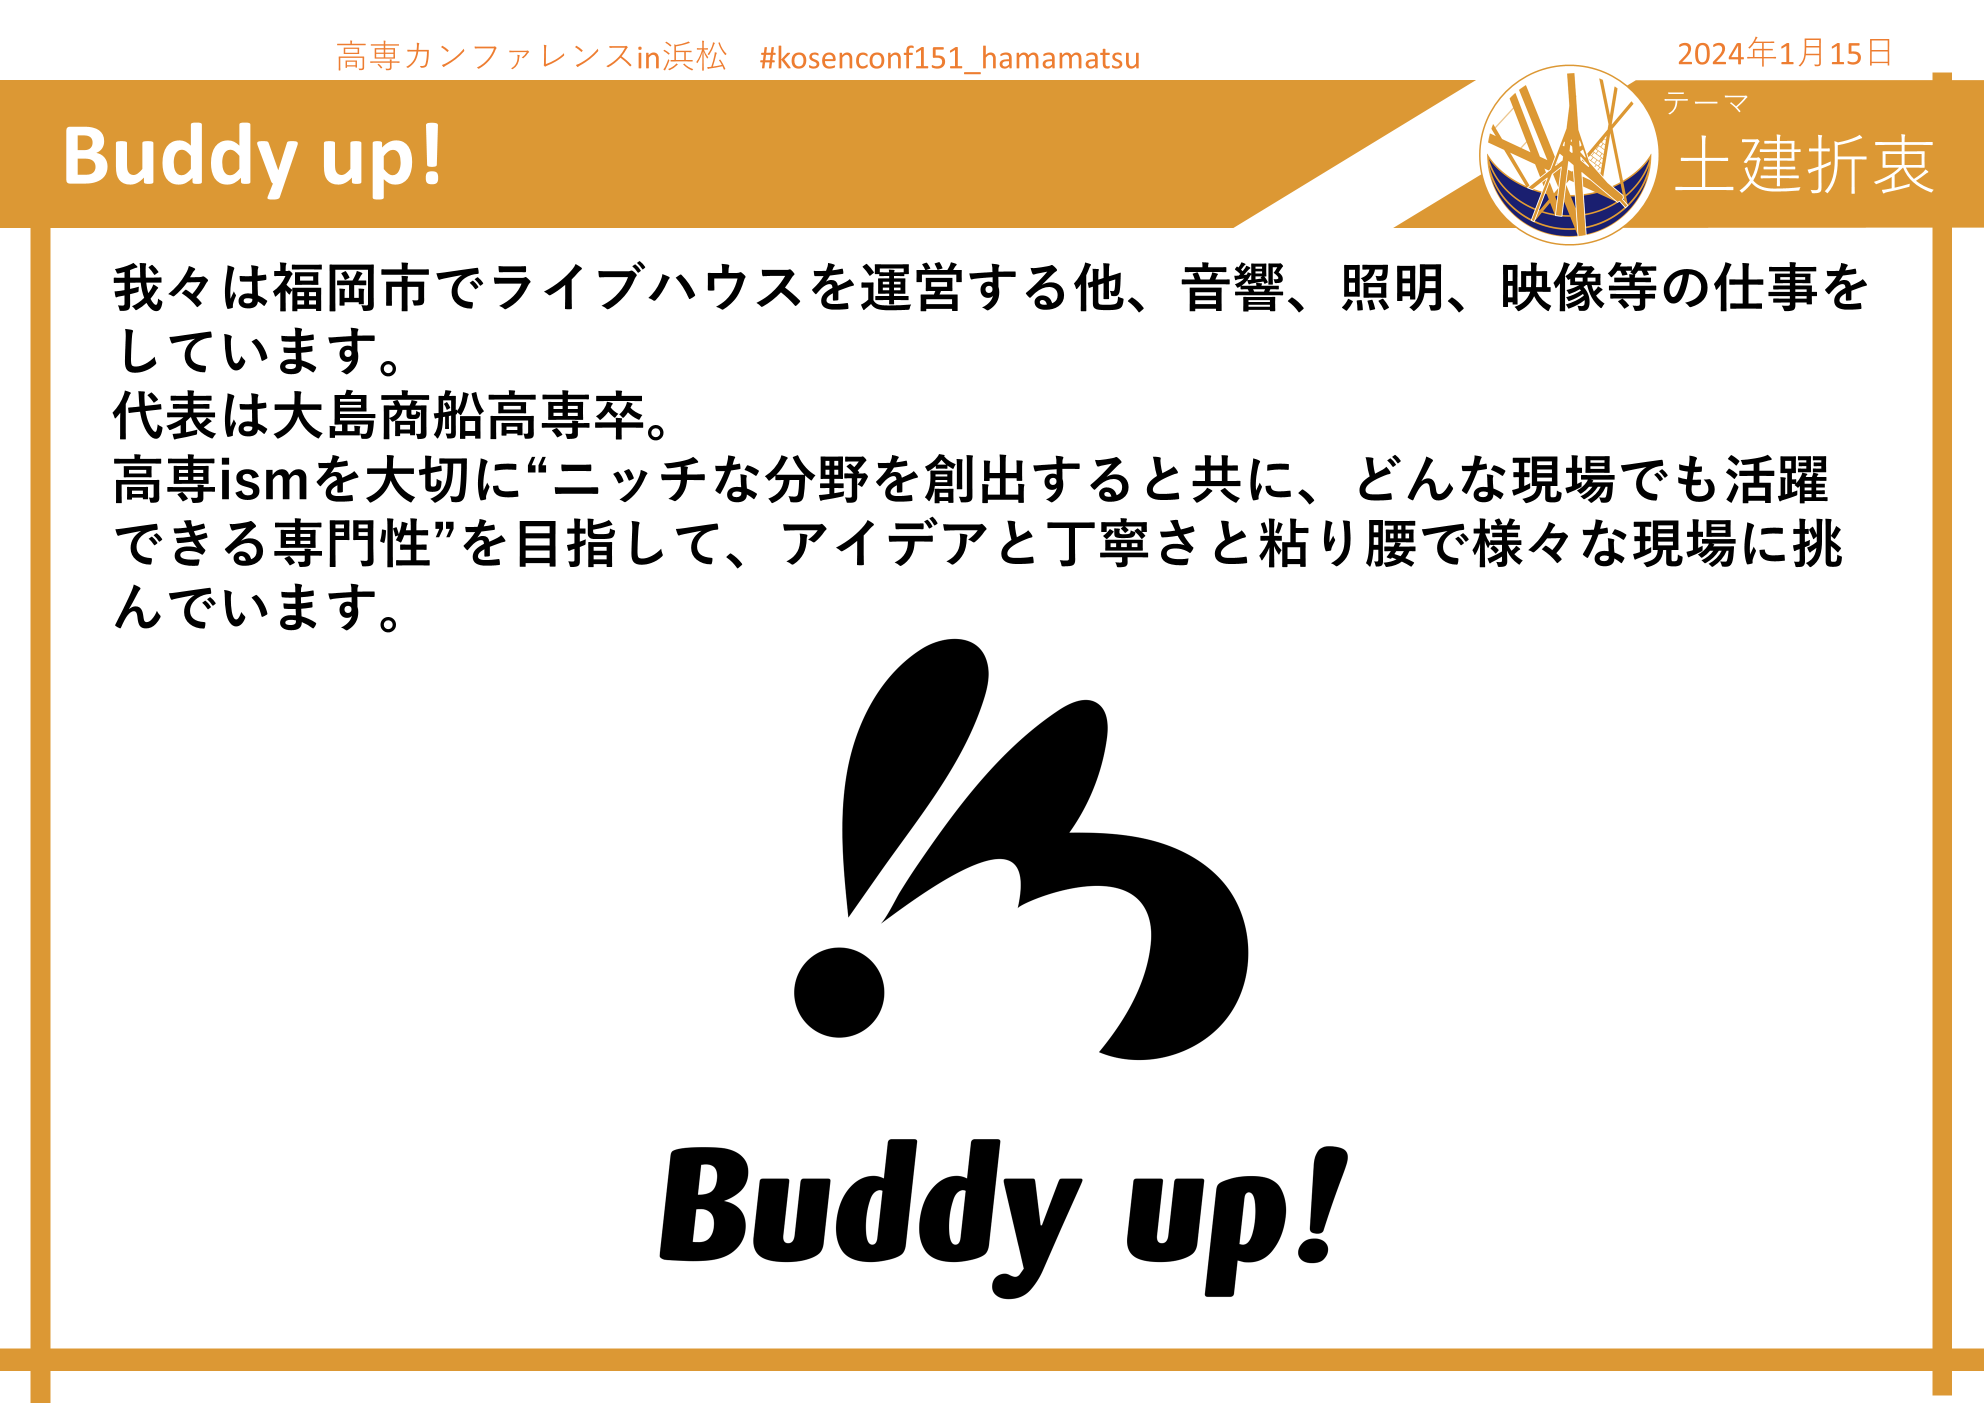 Buddy up!.png